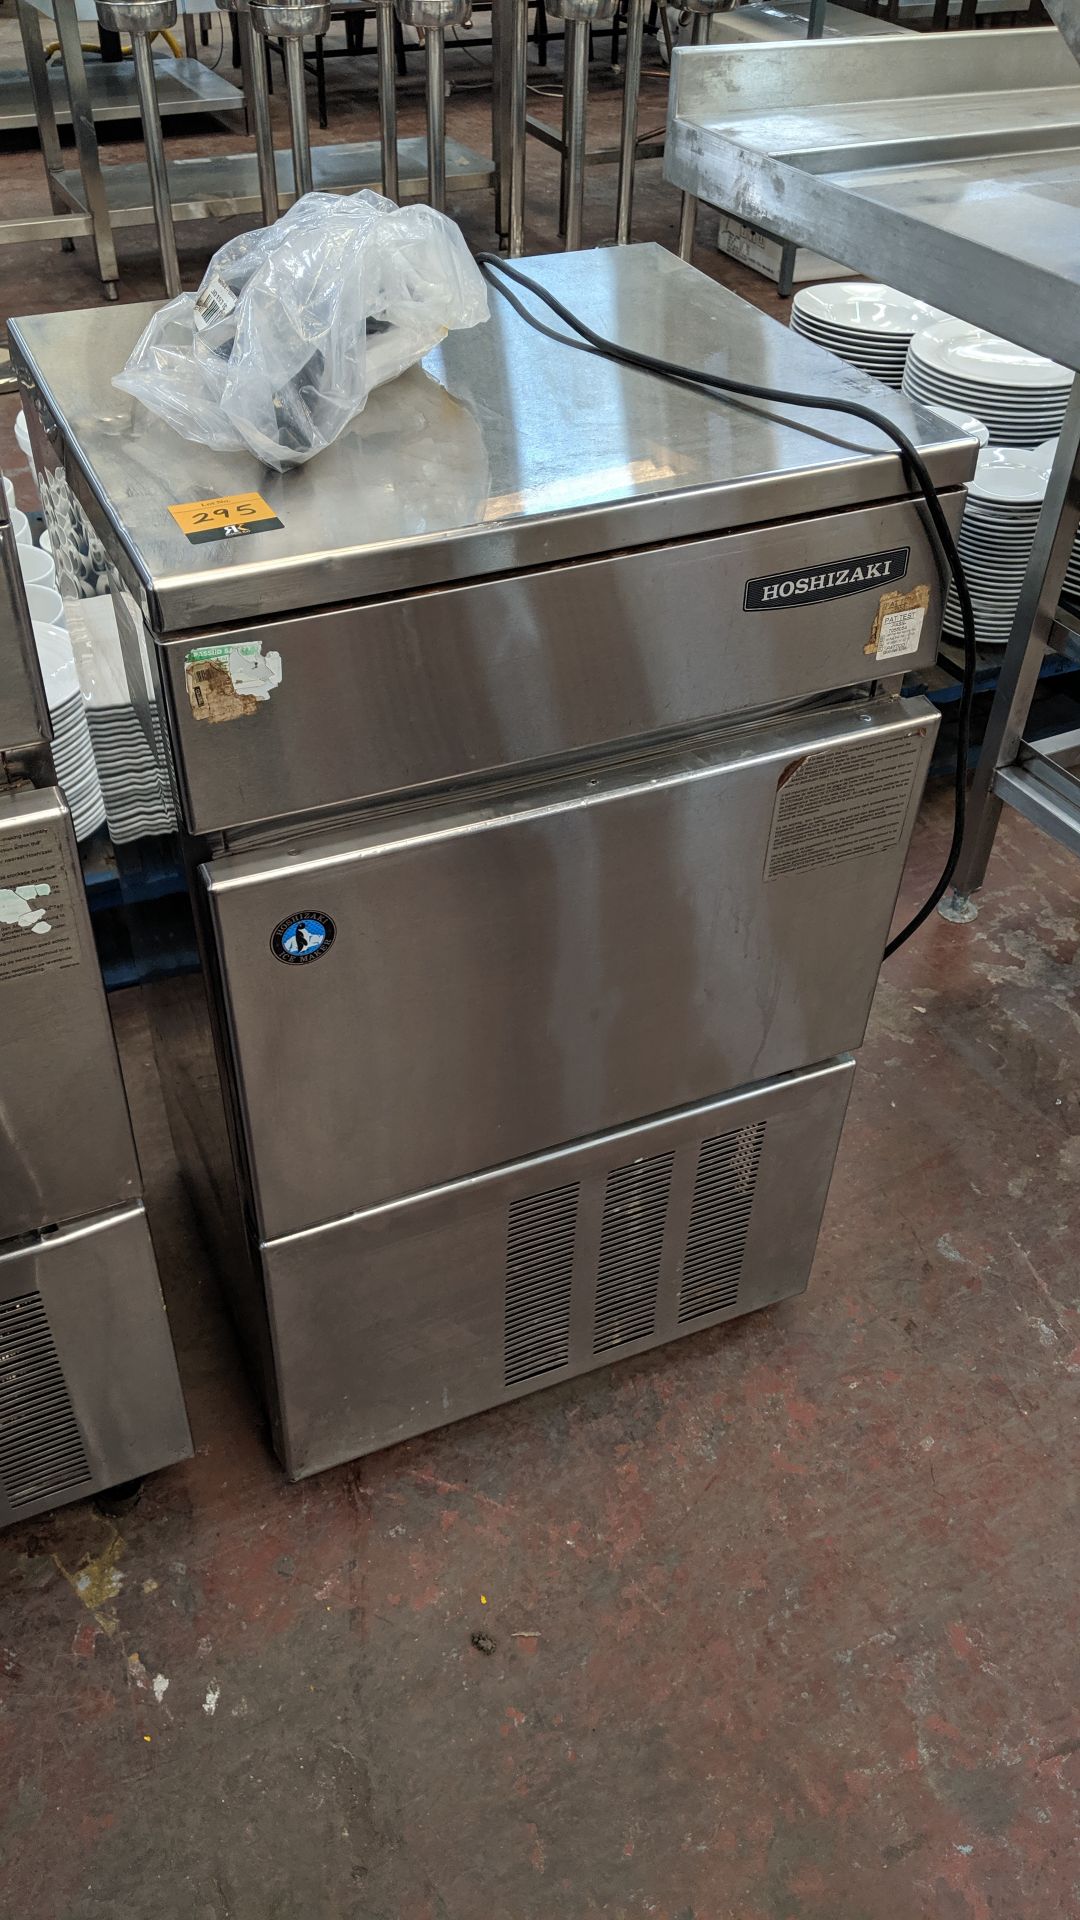 Hoshizaki stainless steel ice maker model IM-45LE-25 IMPORTANT: Please remember goods successfully